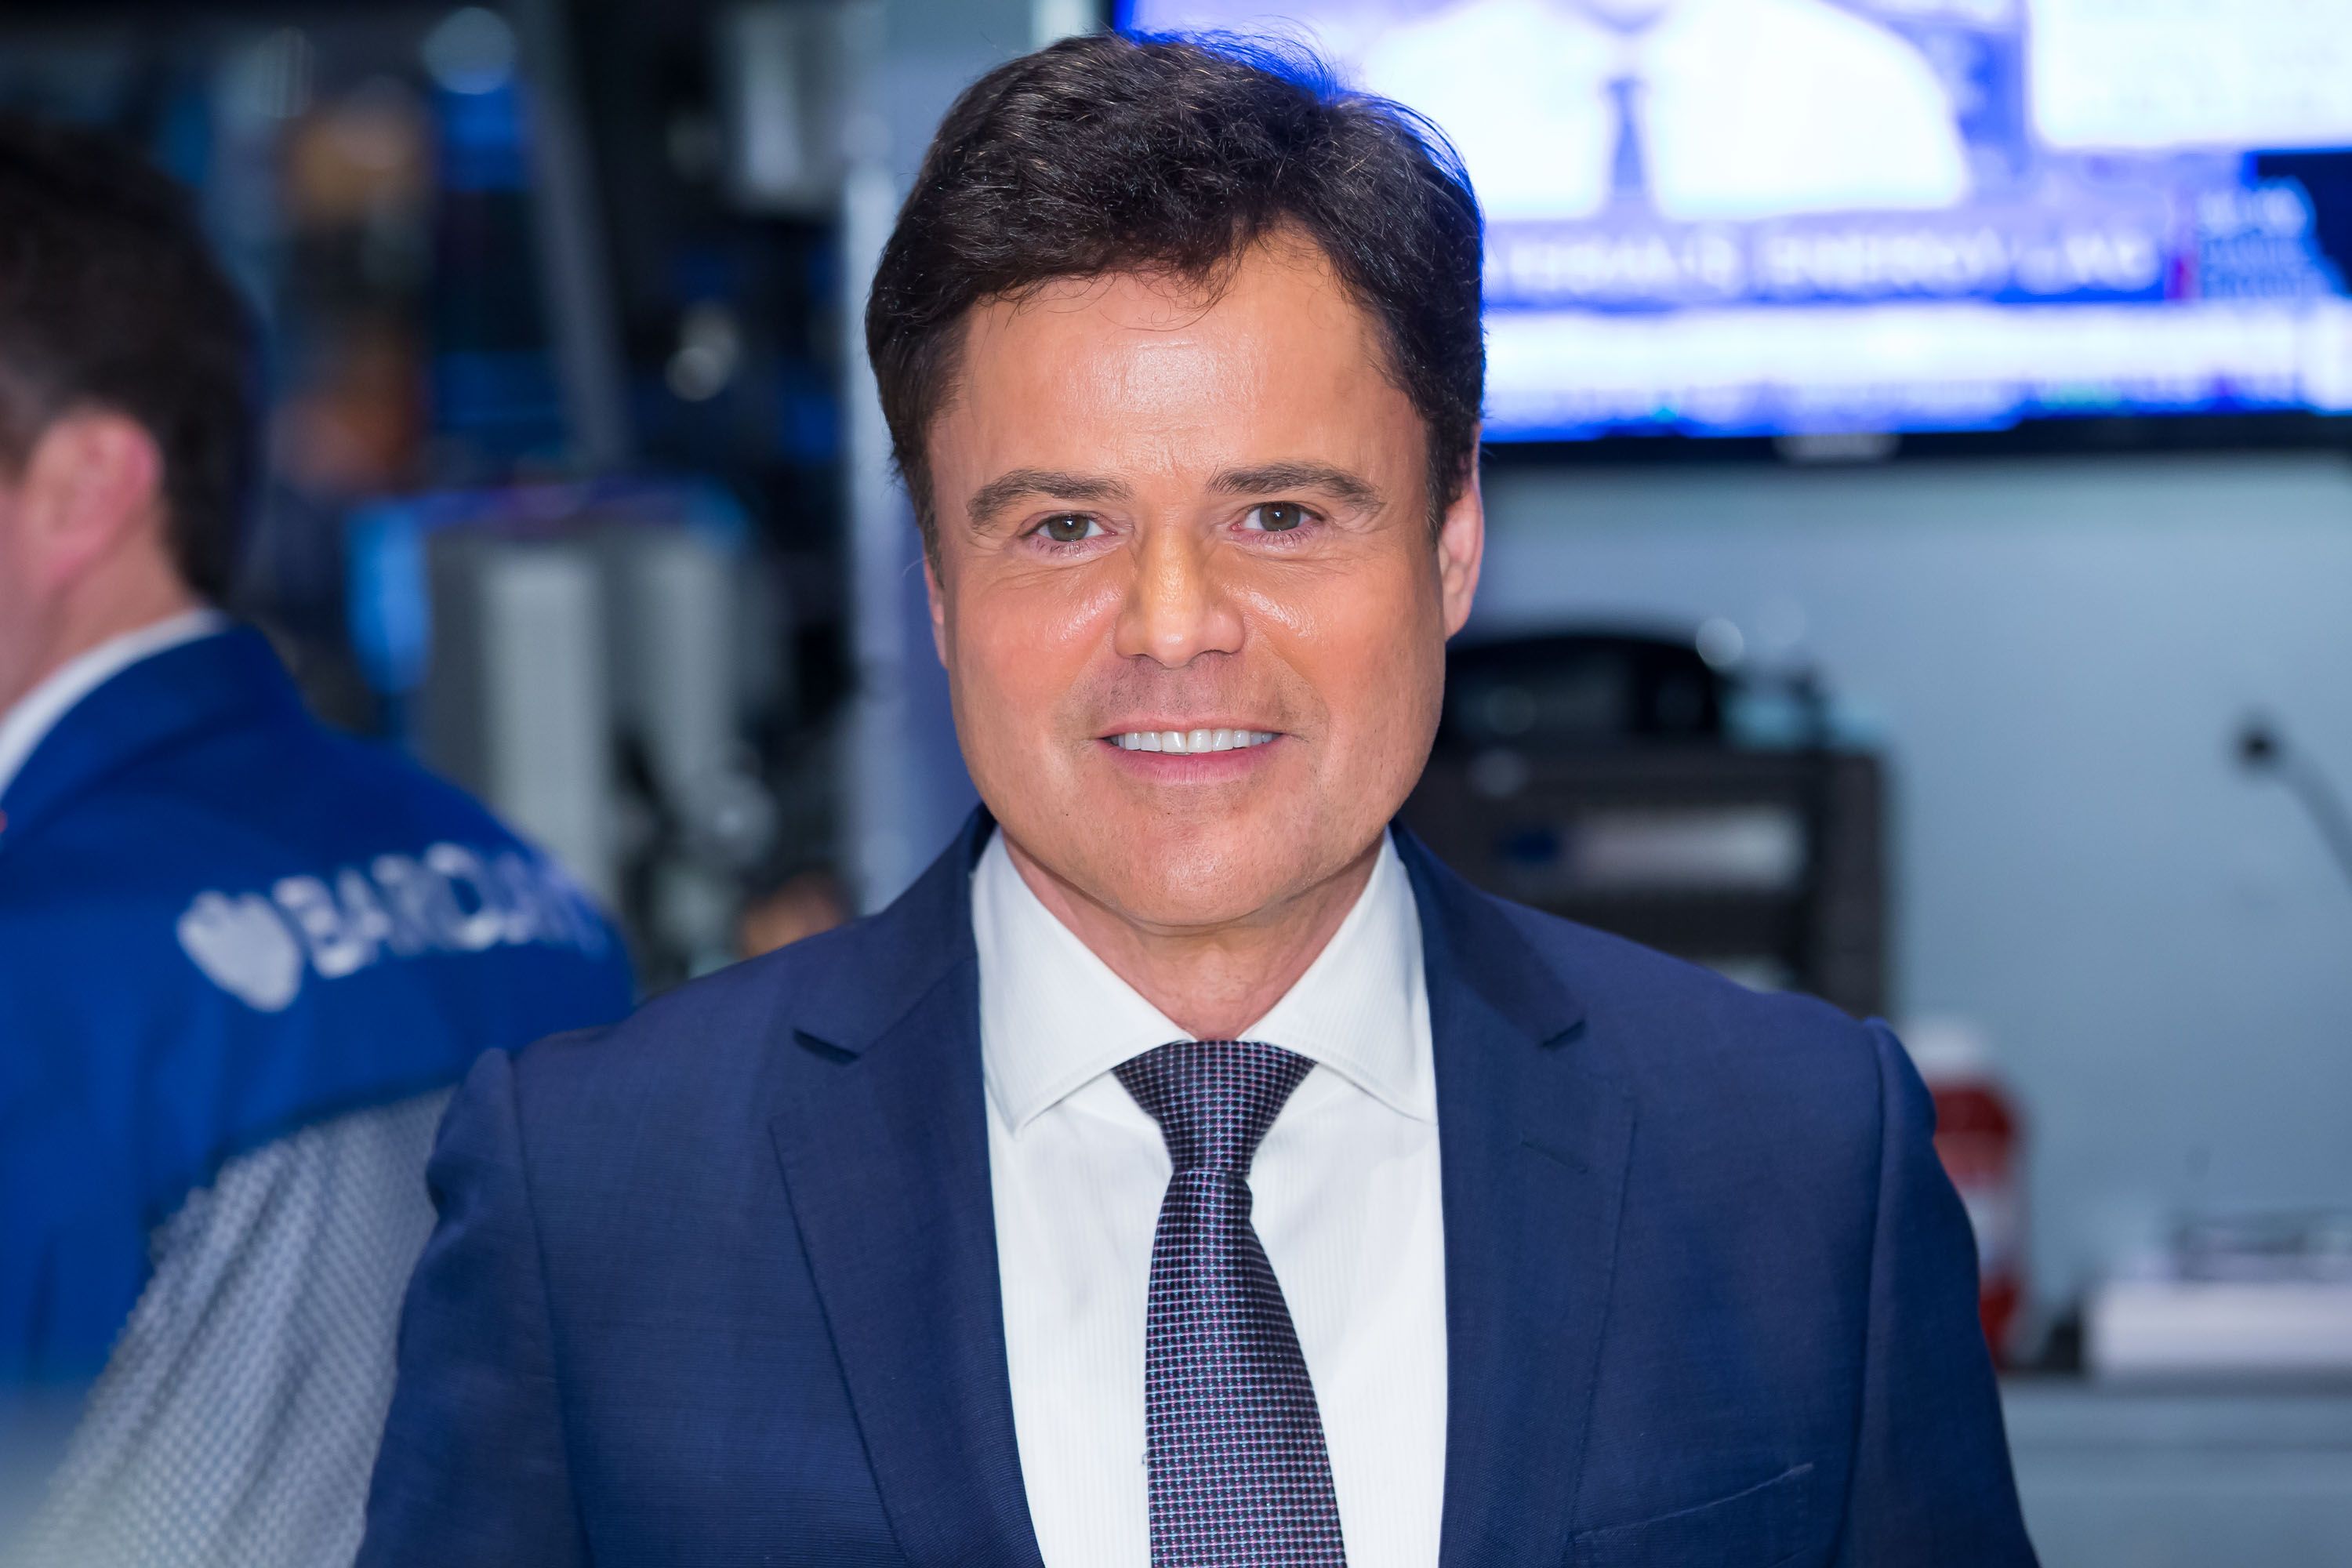 Donny Osmond Through The Years